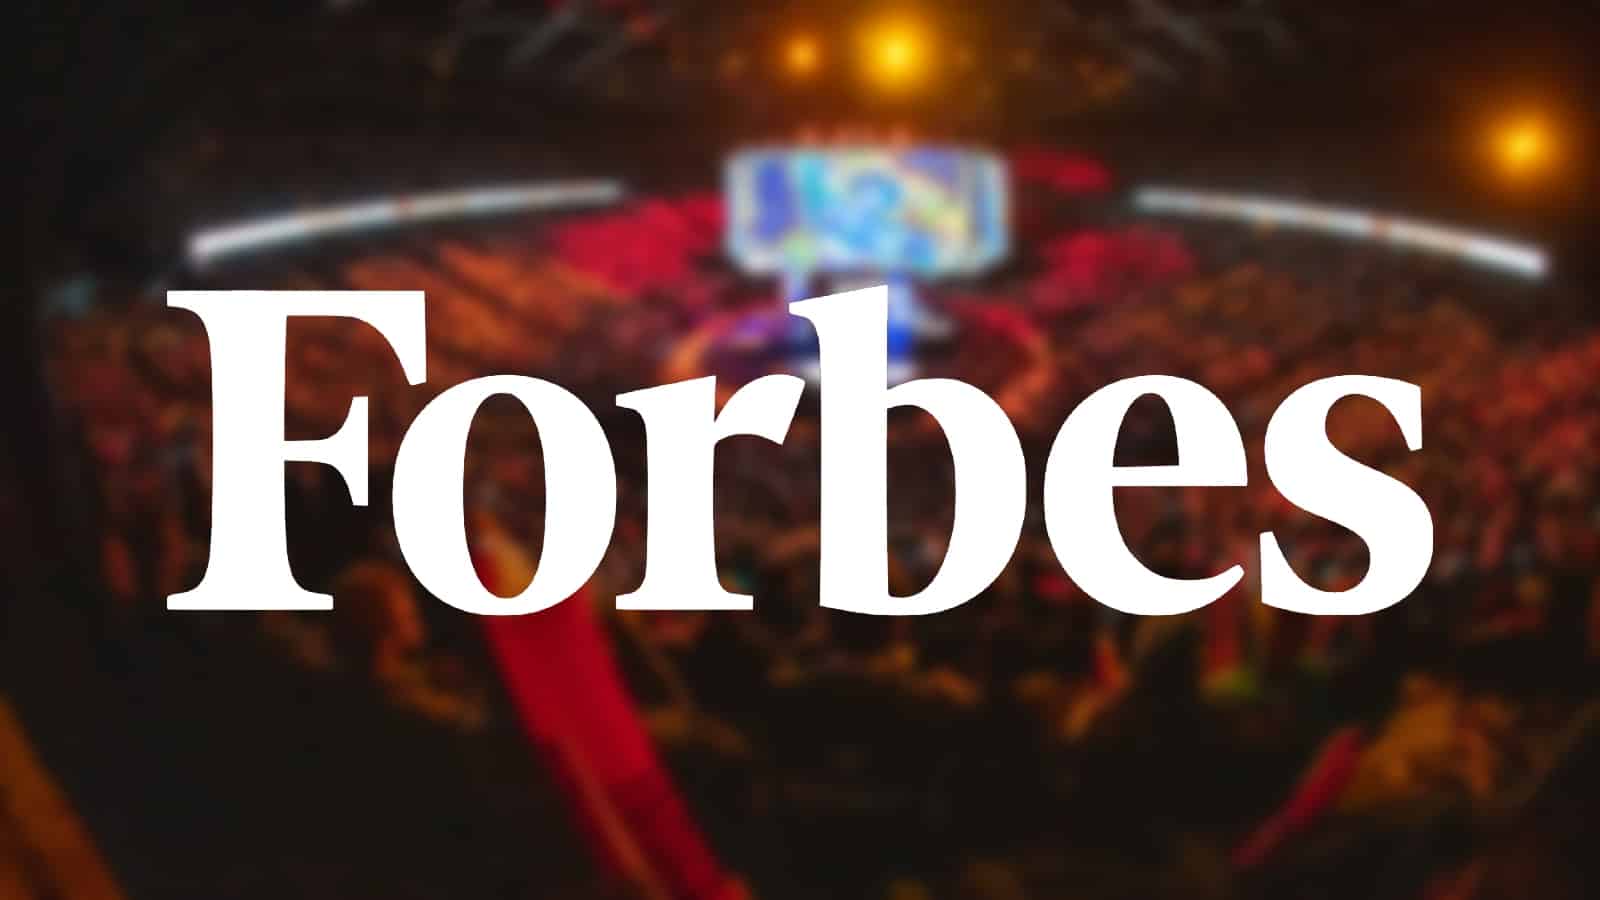 forbes logo on top of blurred picture of esports crowd